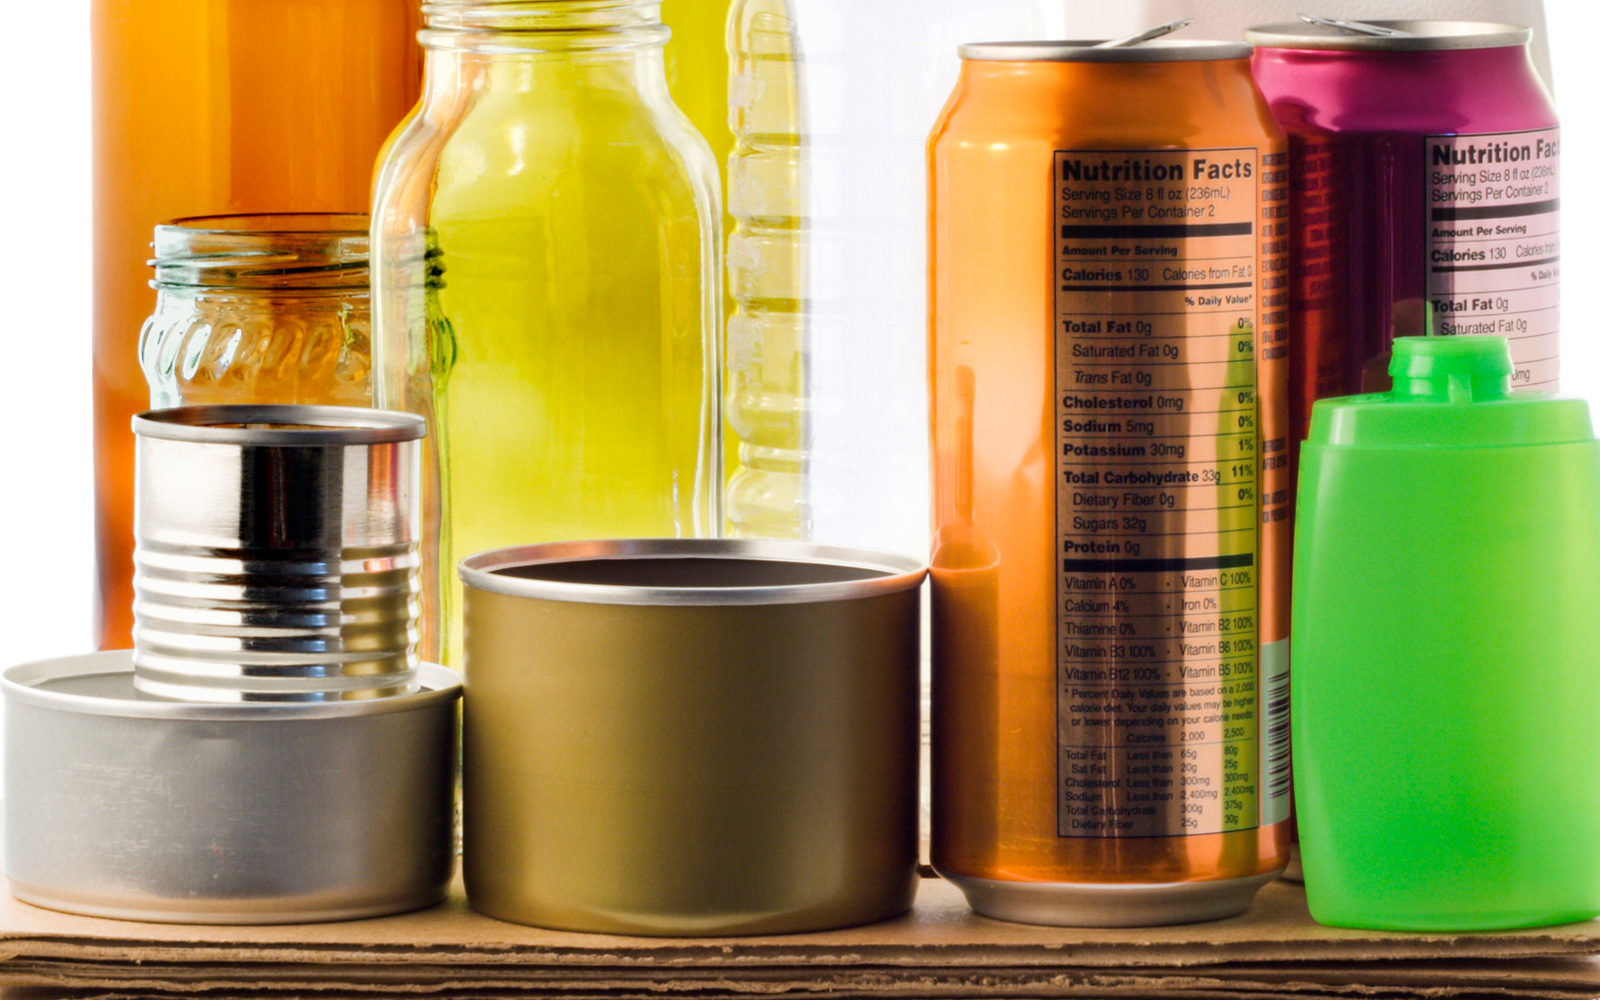 A colorful variety of different packaging types, including cans, glass jars, plastic bottles, and cardboard